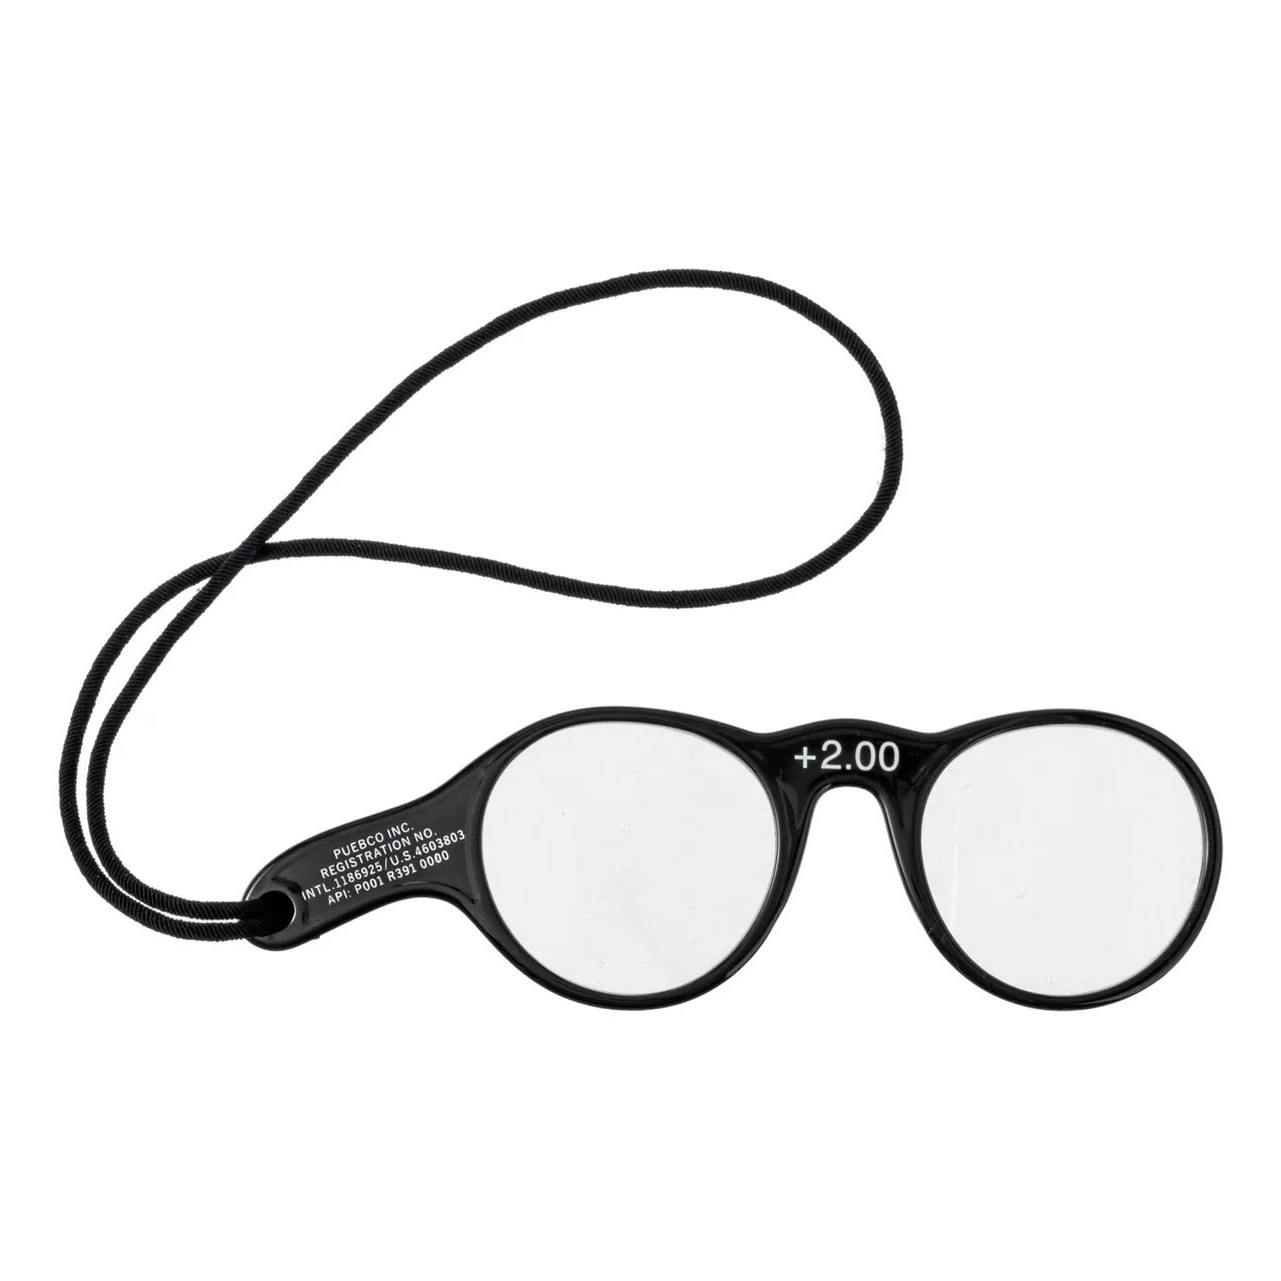 Magnifier Glasses with Code & Cord